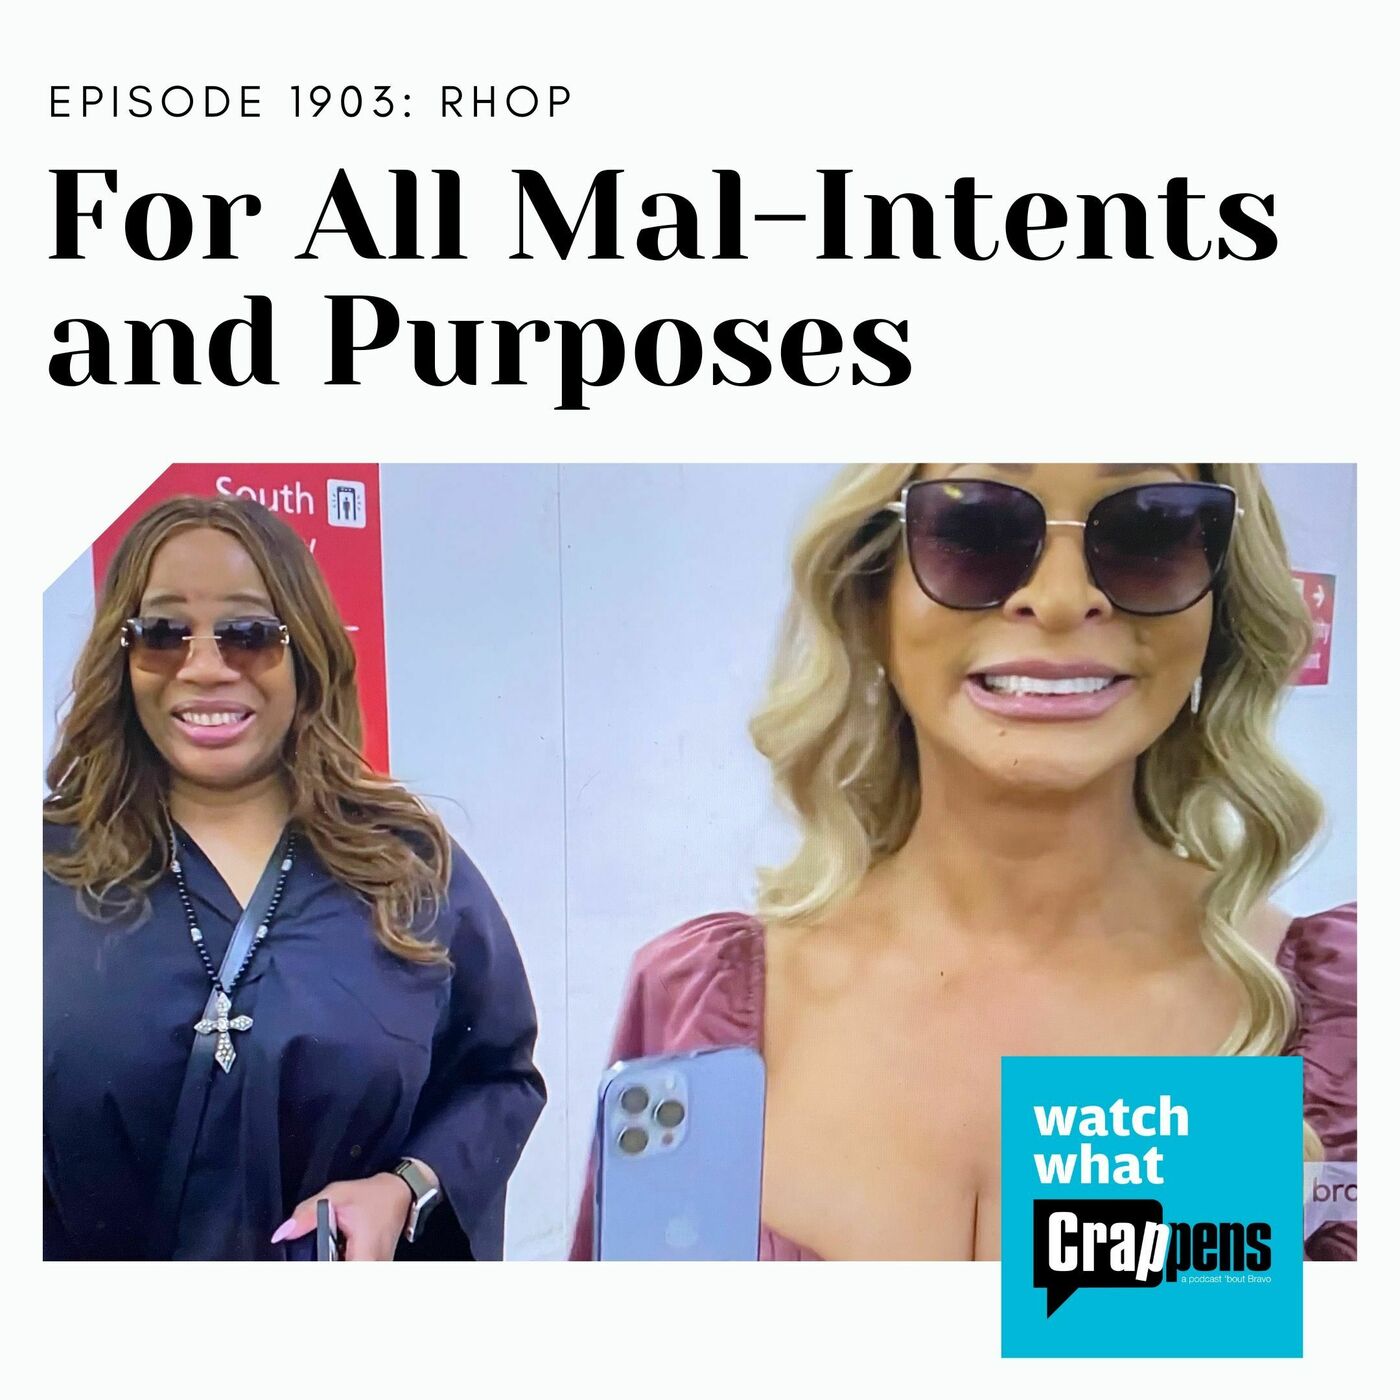 RHOP: For All Mal-Intents and Purposes